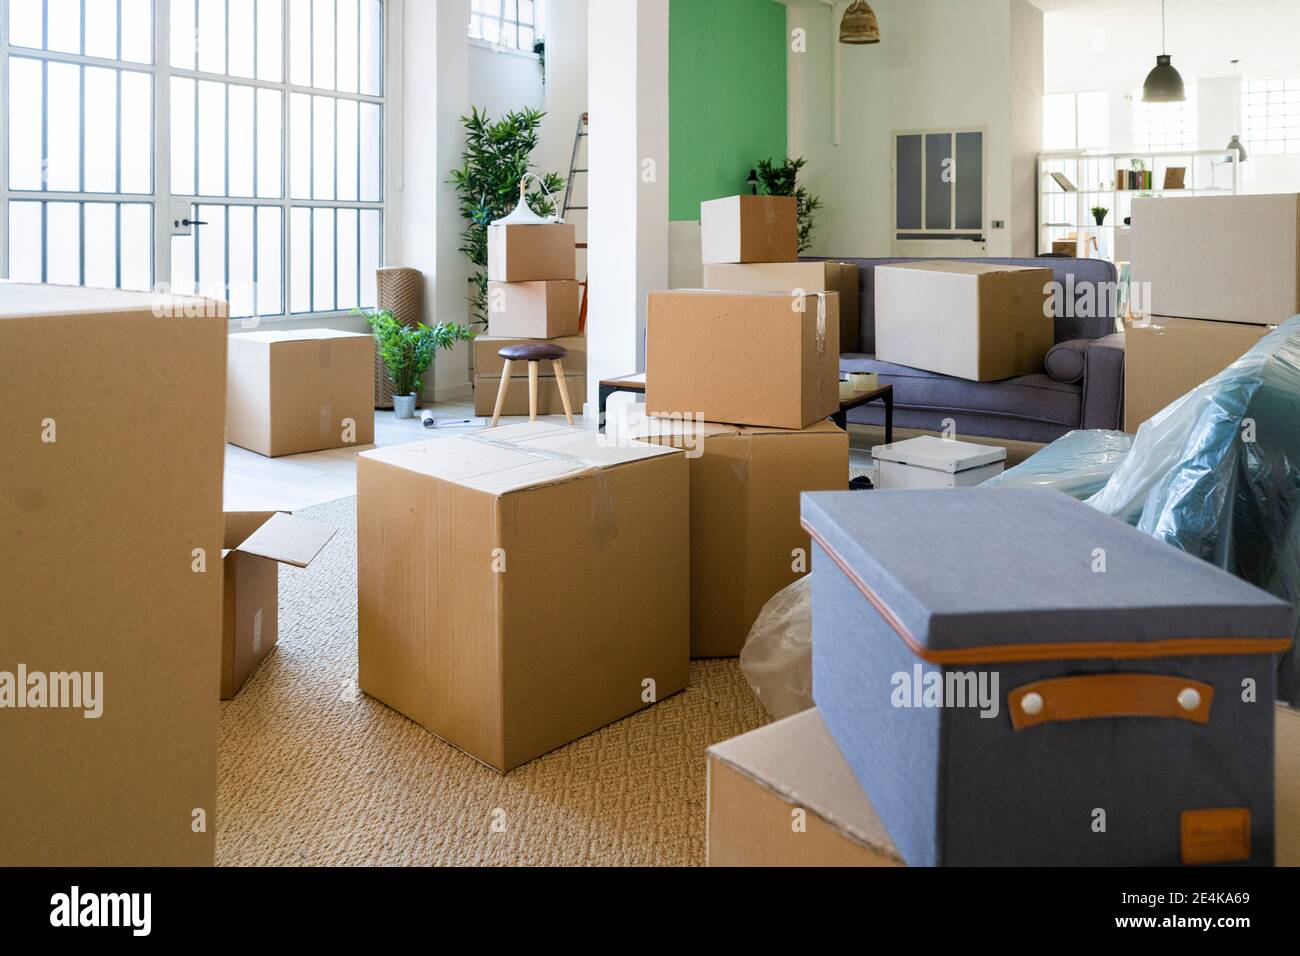 Cardboard boxes in new home during relocation Stock Photo